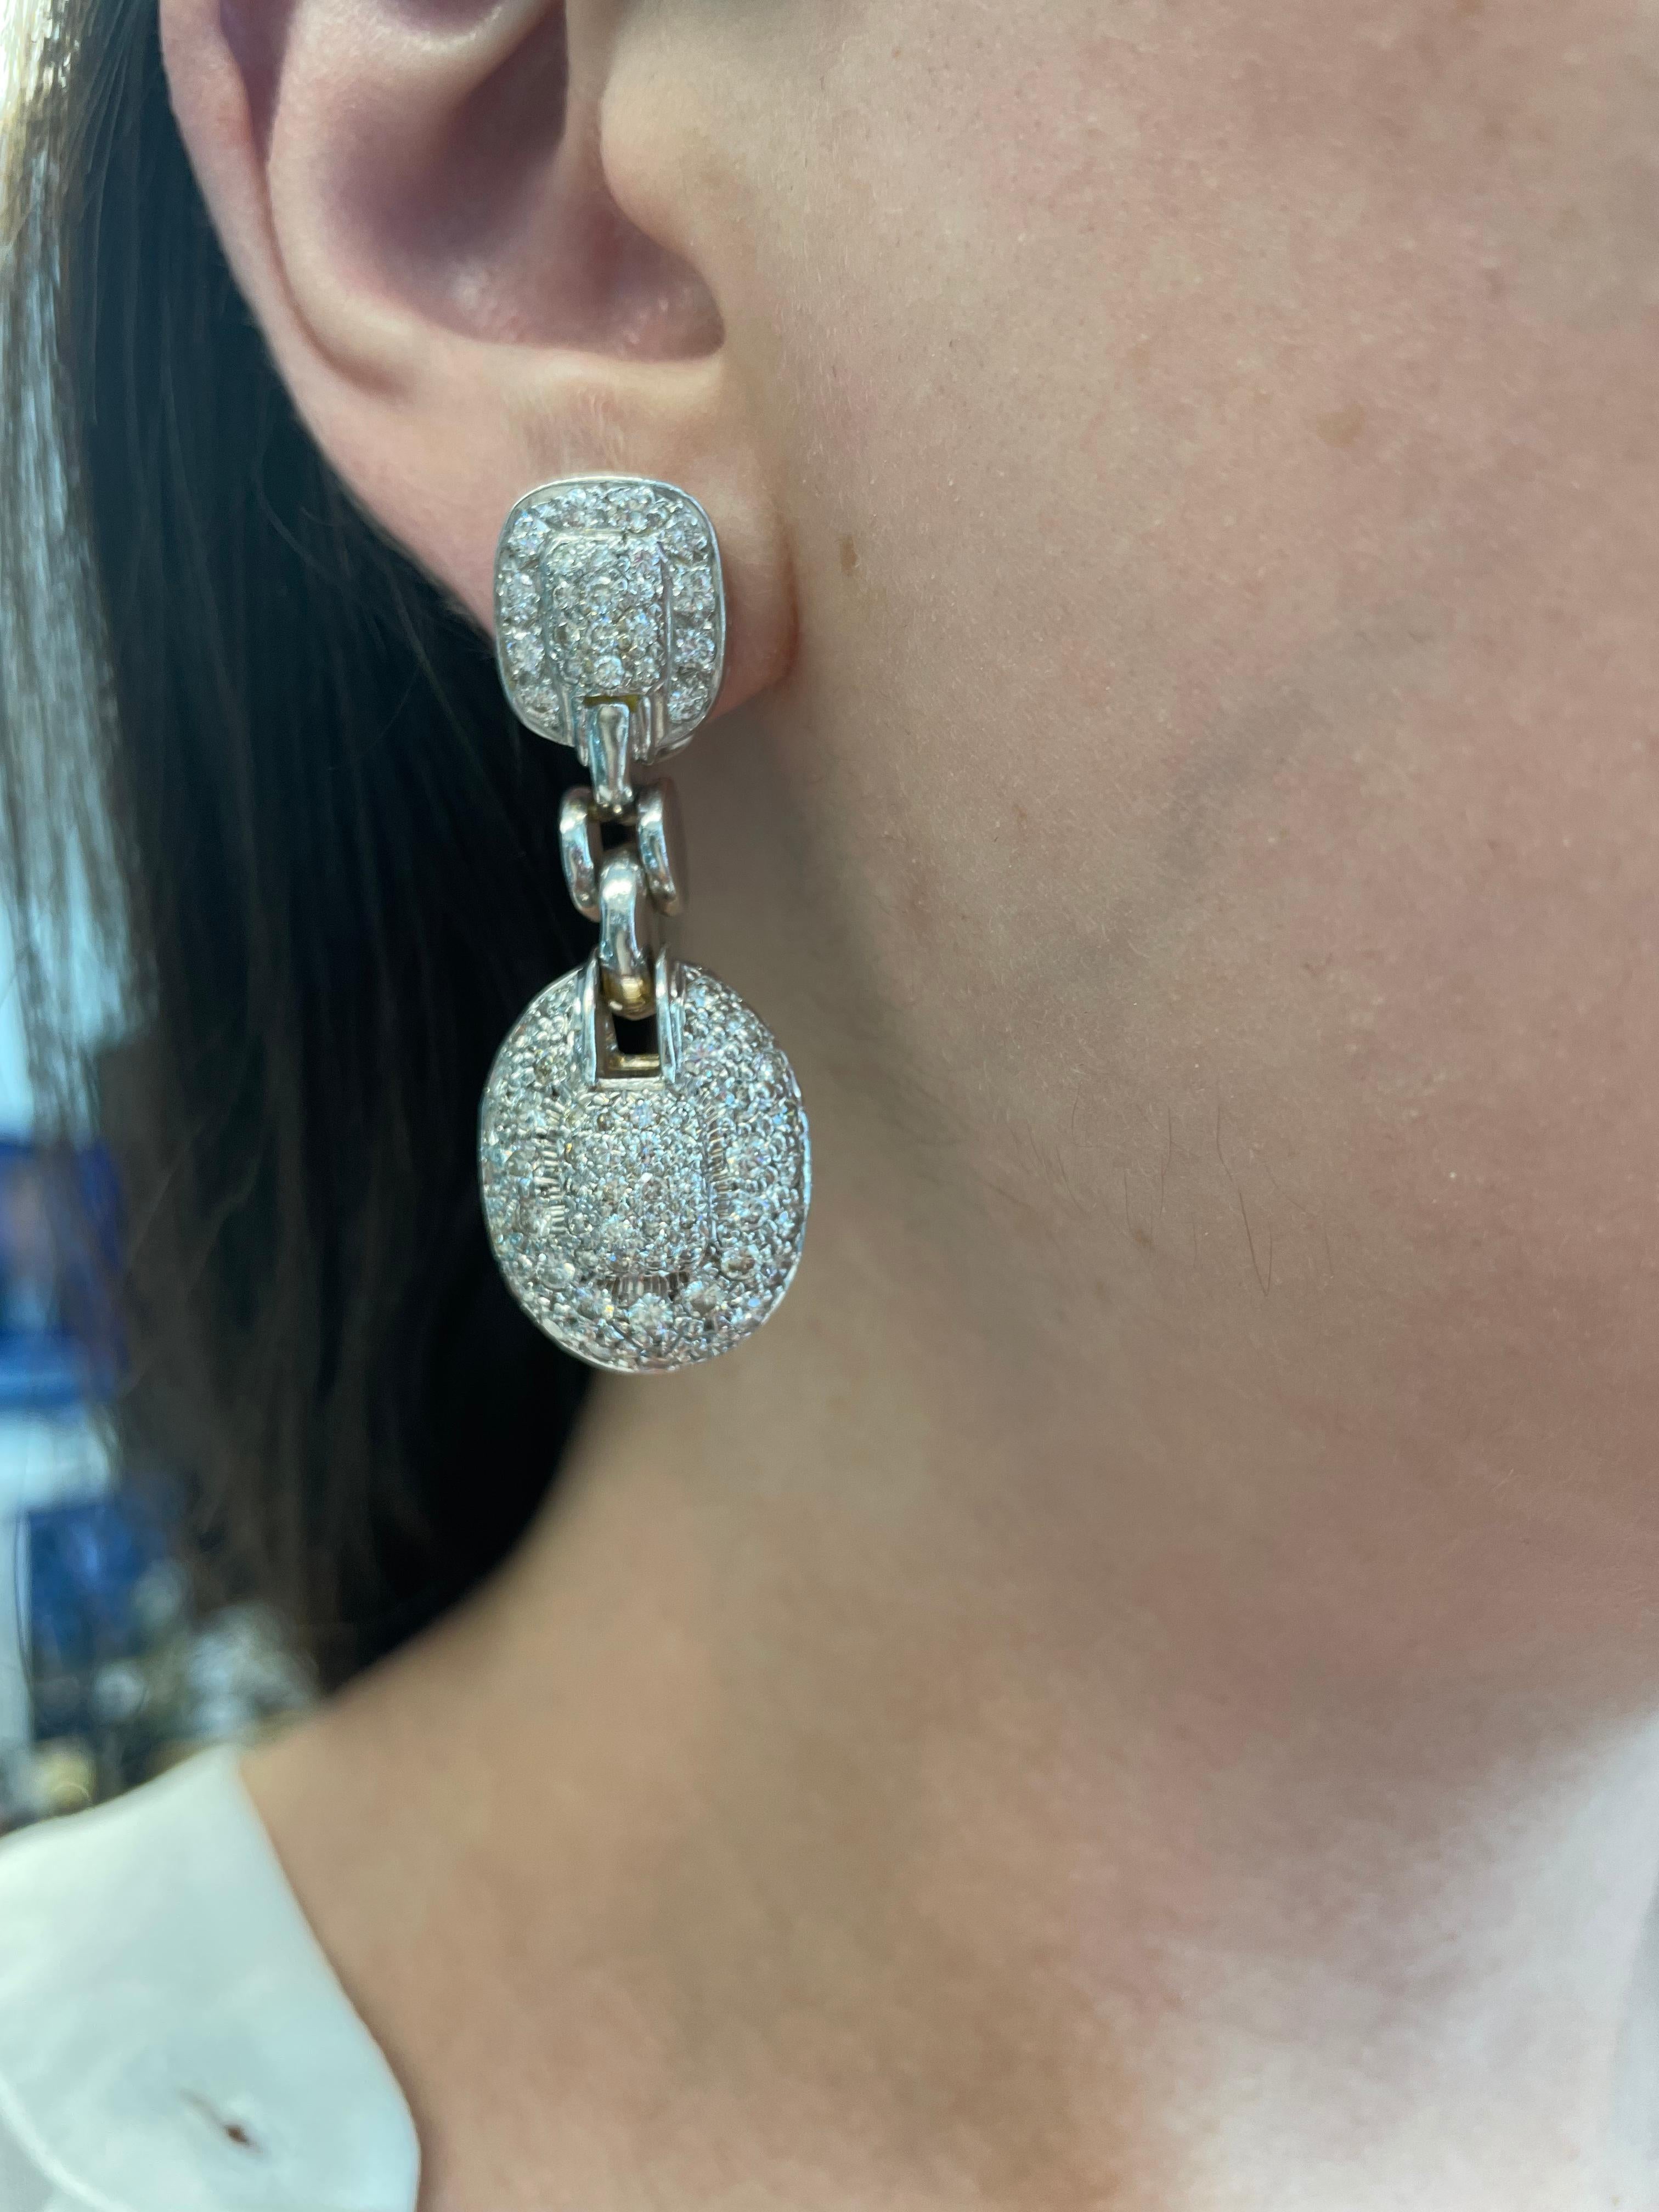 Grand pave set diamond earrings.
5.09ct of round brilliant diamonds, approximately H/I color grade and SI clarity grade diamonds. 18-karat white gold. 
Accommodated with an up to date appraisal by a GIA G.G. upon request. Please contact us with any